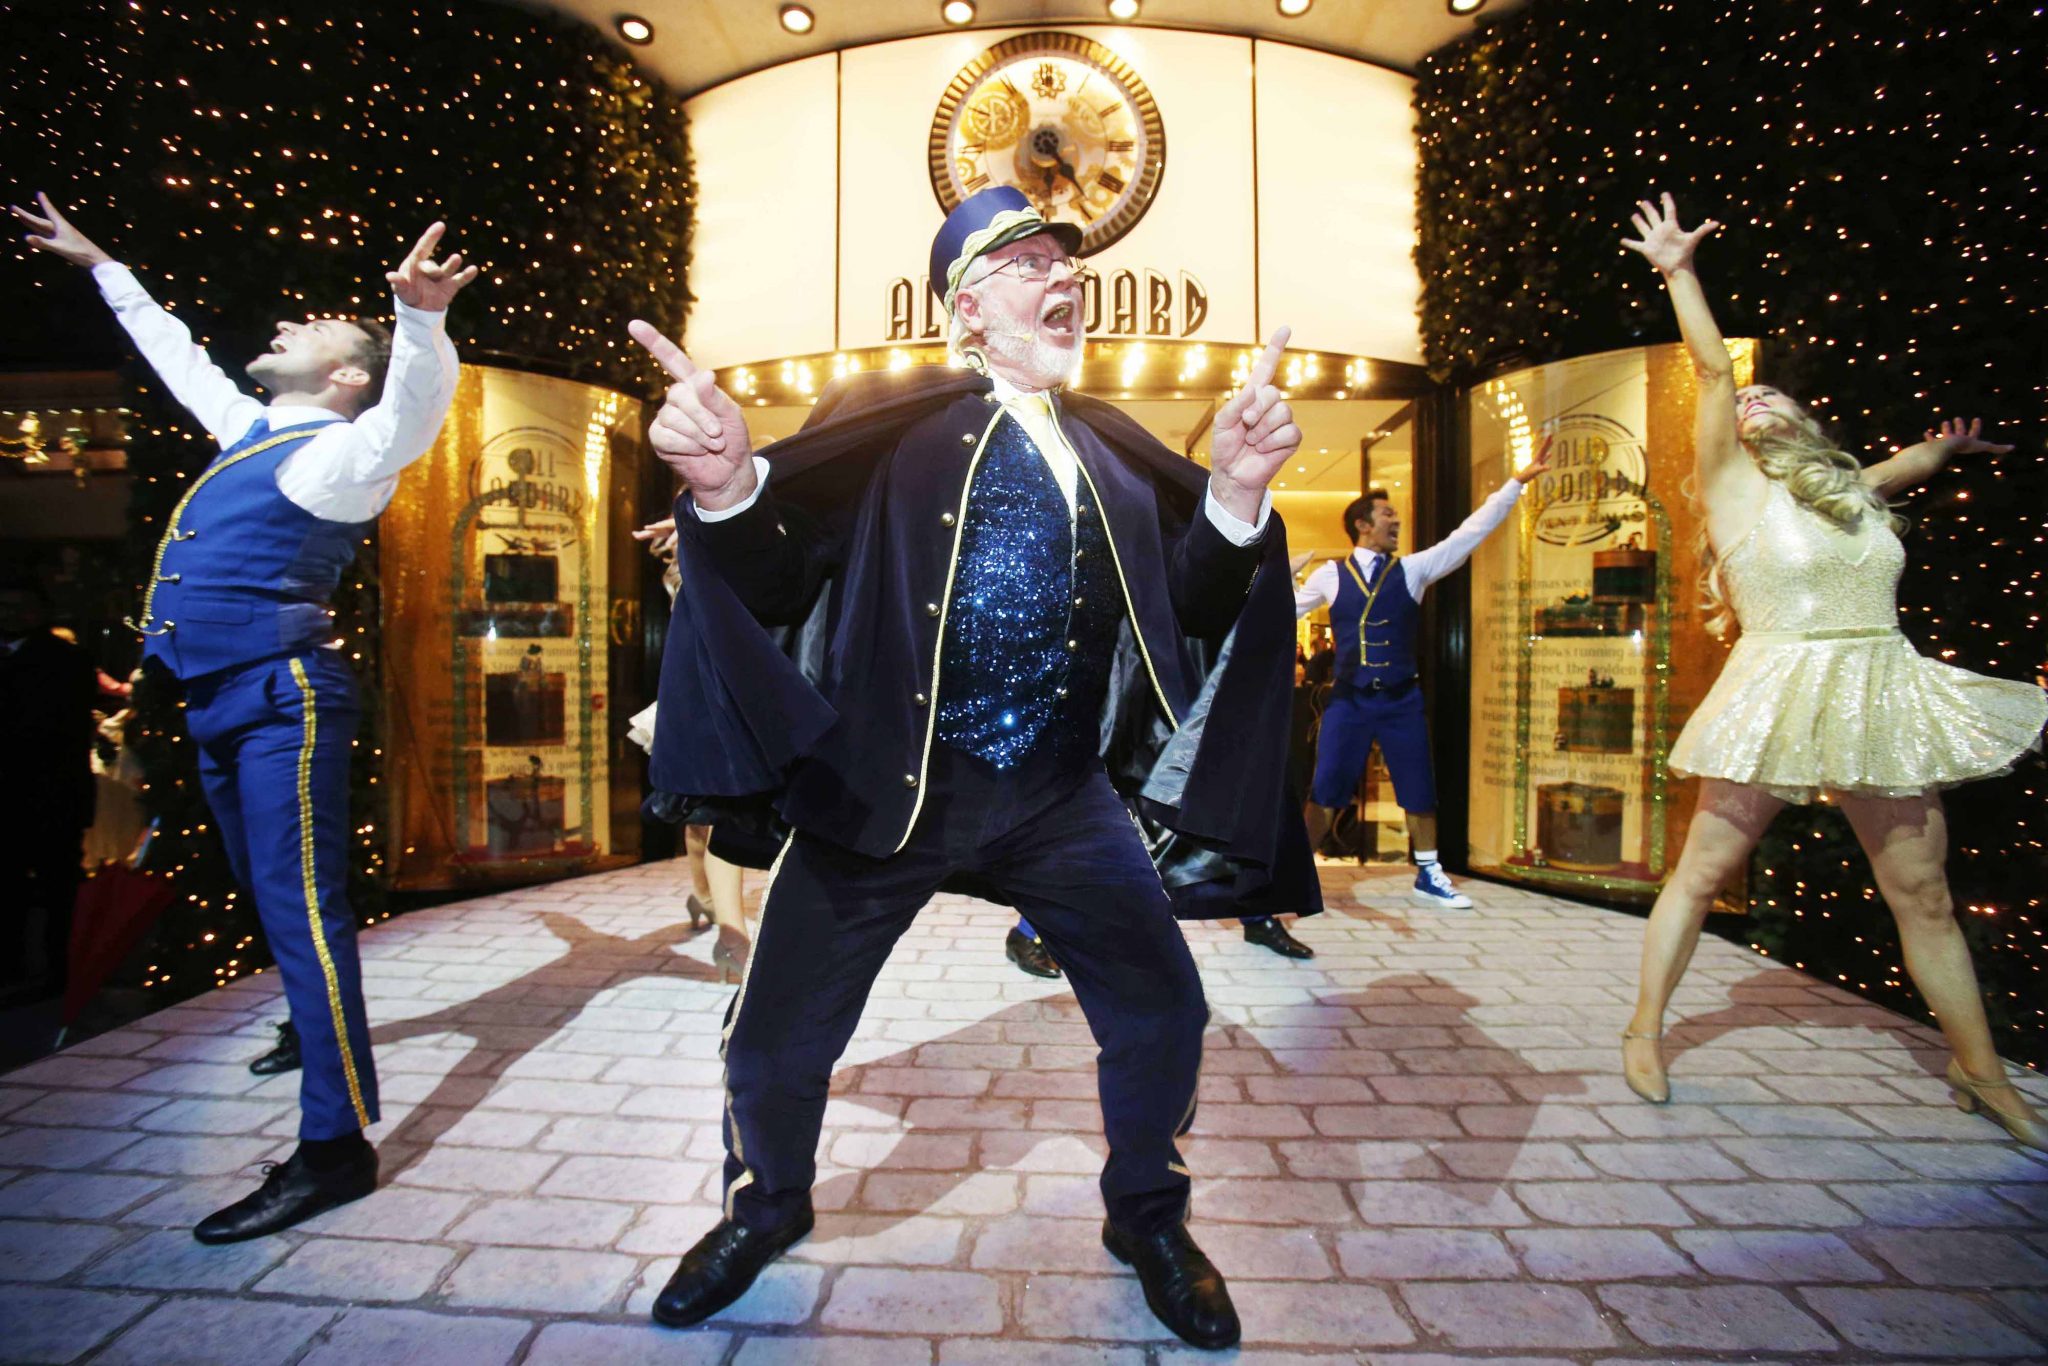 The Brown Thomas Christmas windows are officially open, and the theme is just magical